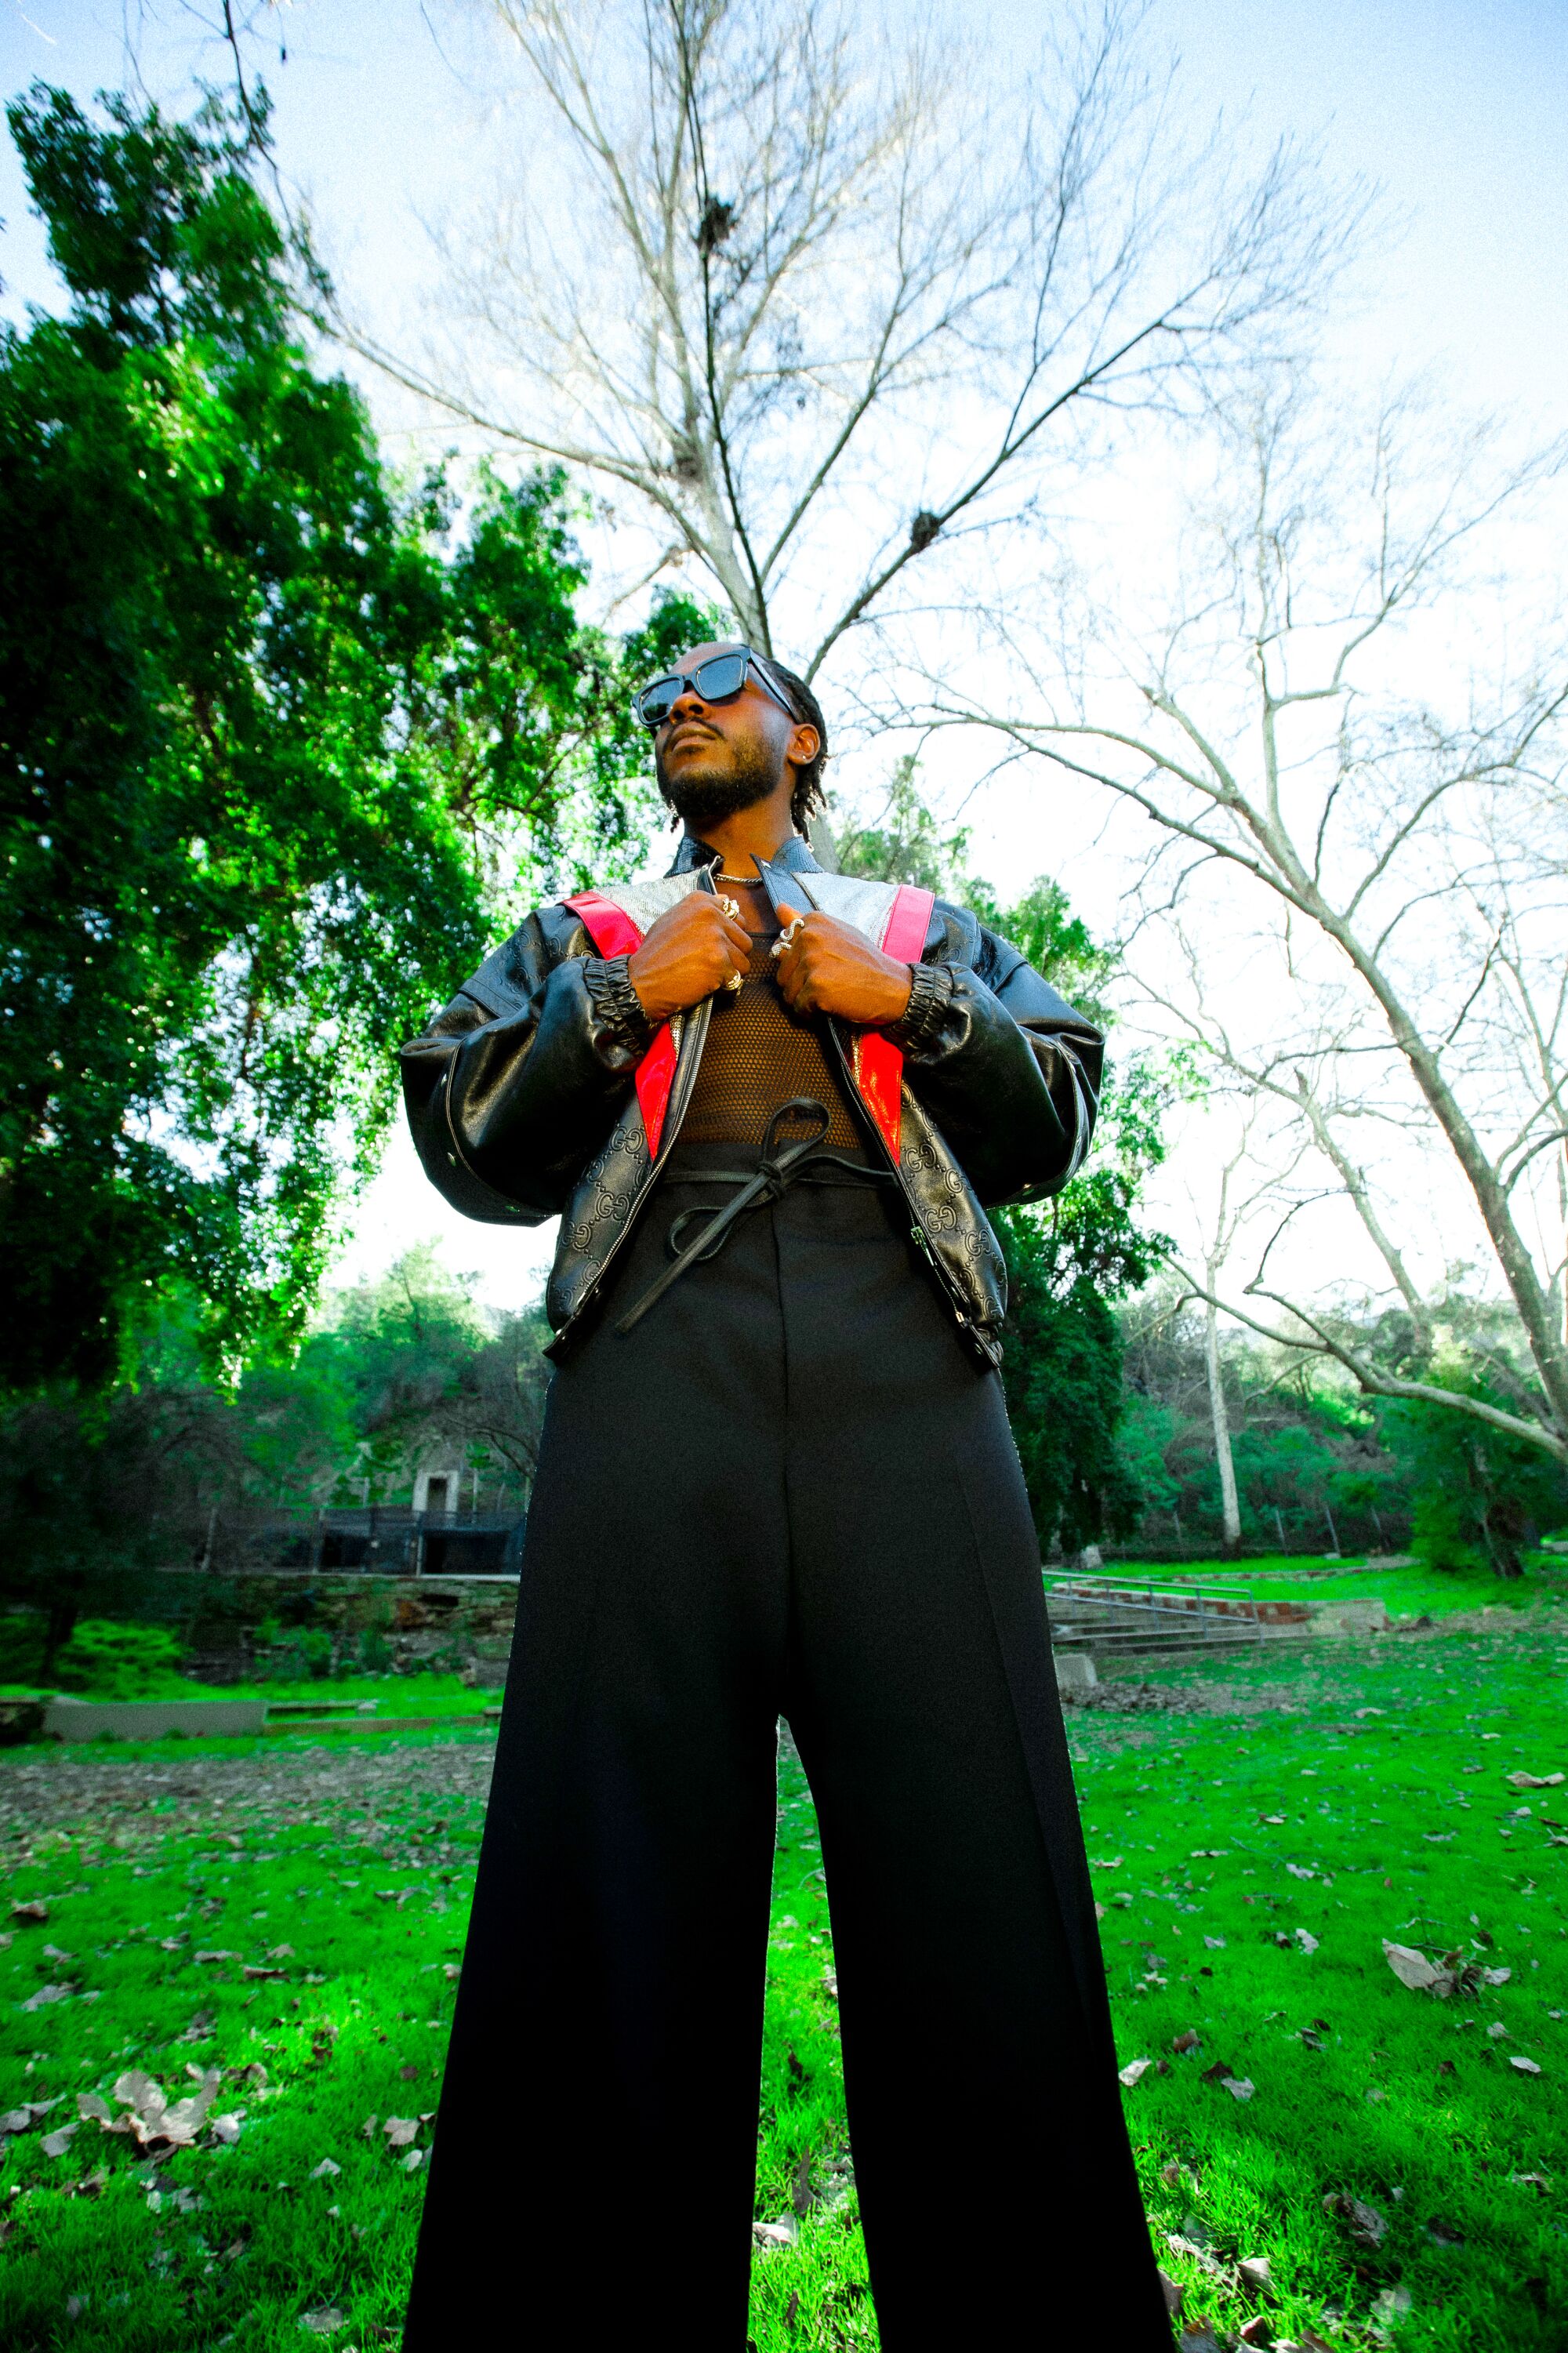 Channel Tres photographed for Image magazine on February 1, 2023 near the old zoo in the Griffth Park area of Los Angeles, CA